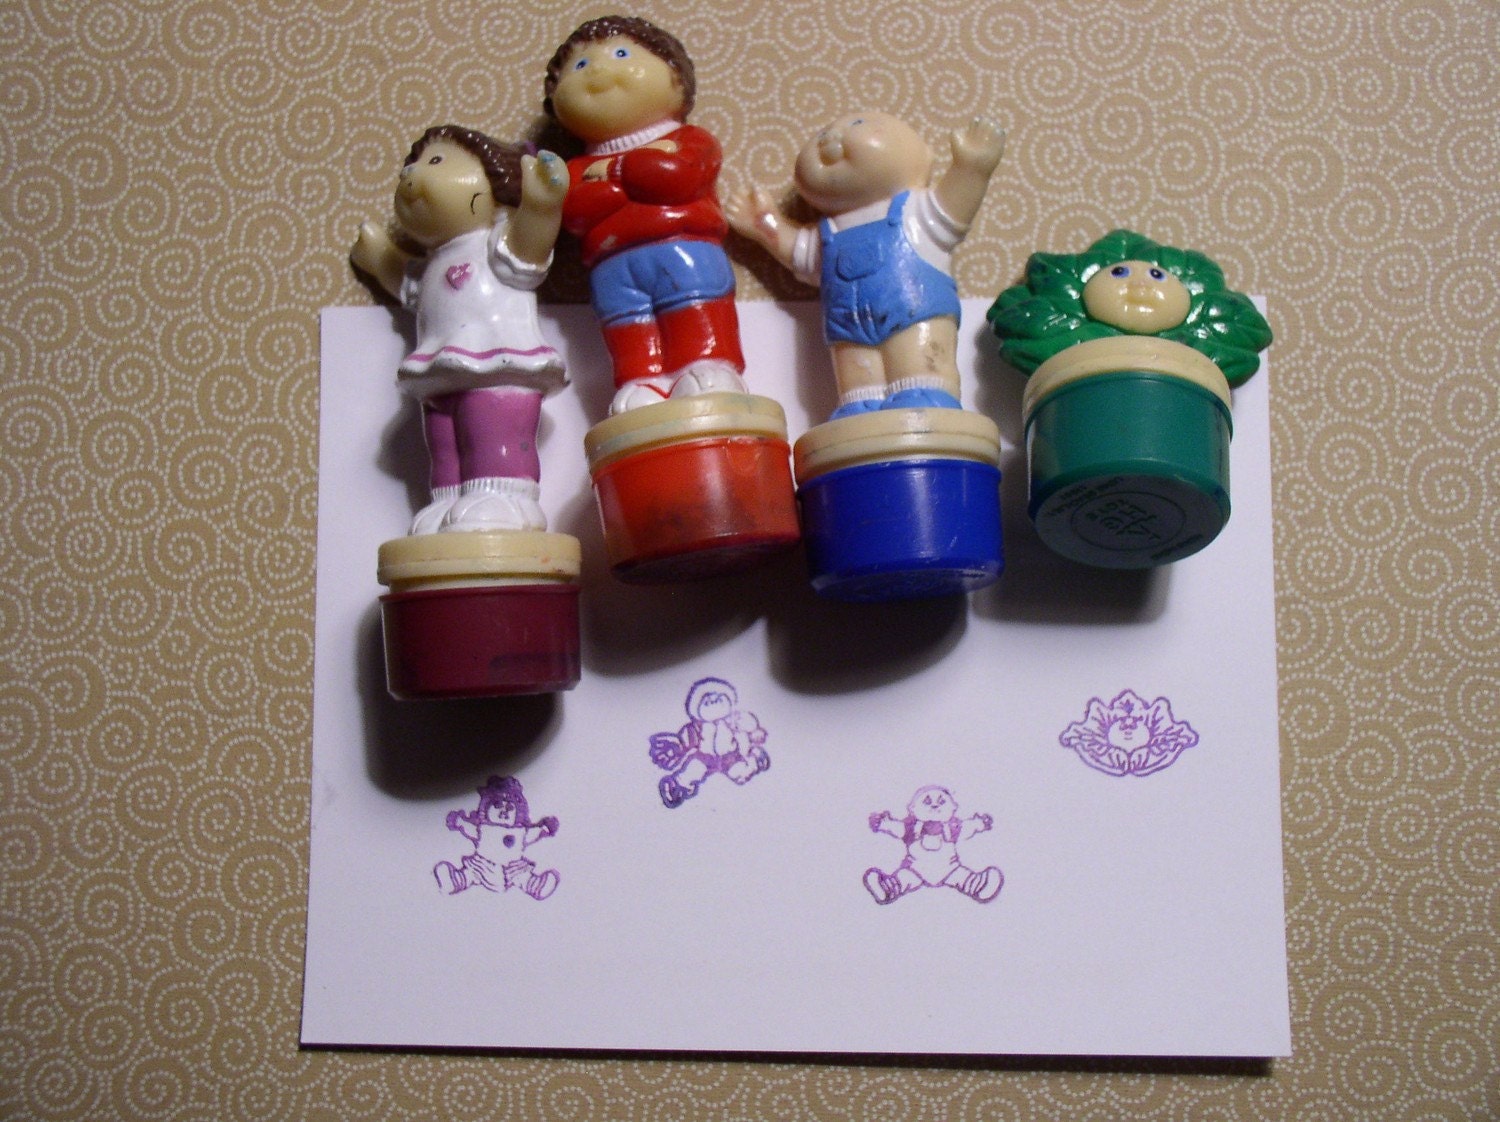 Cabbage Patch Dolls For Sale In Canada